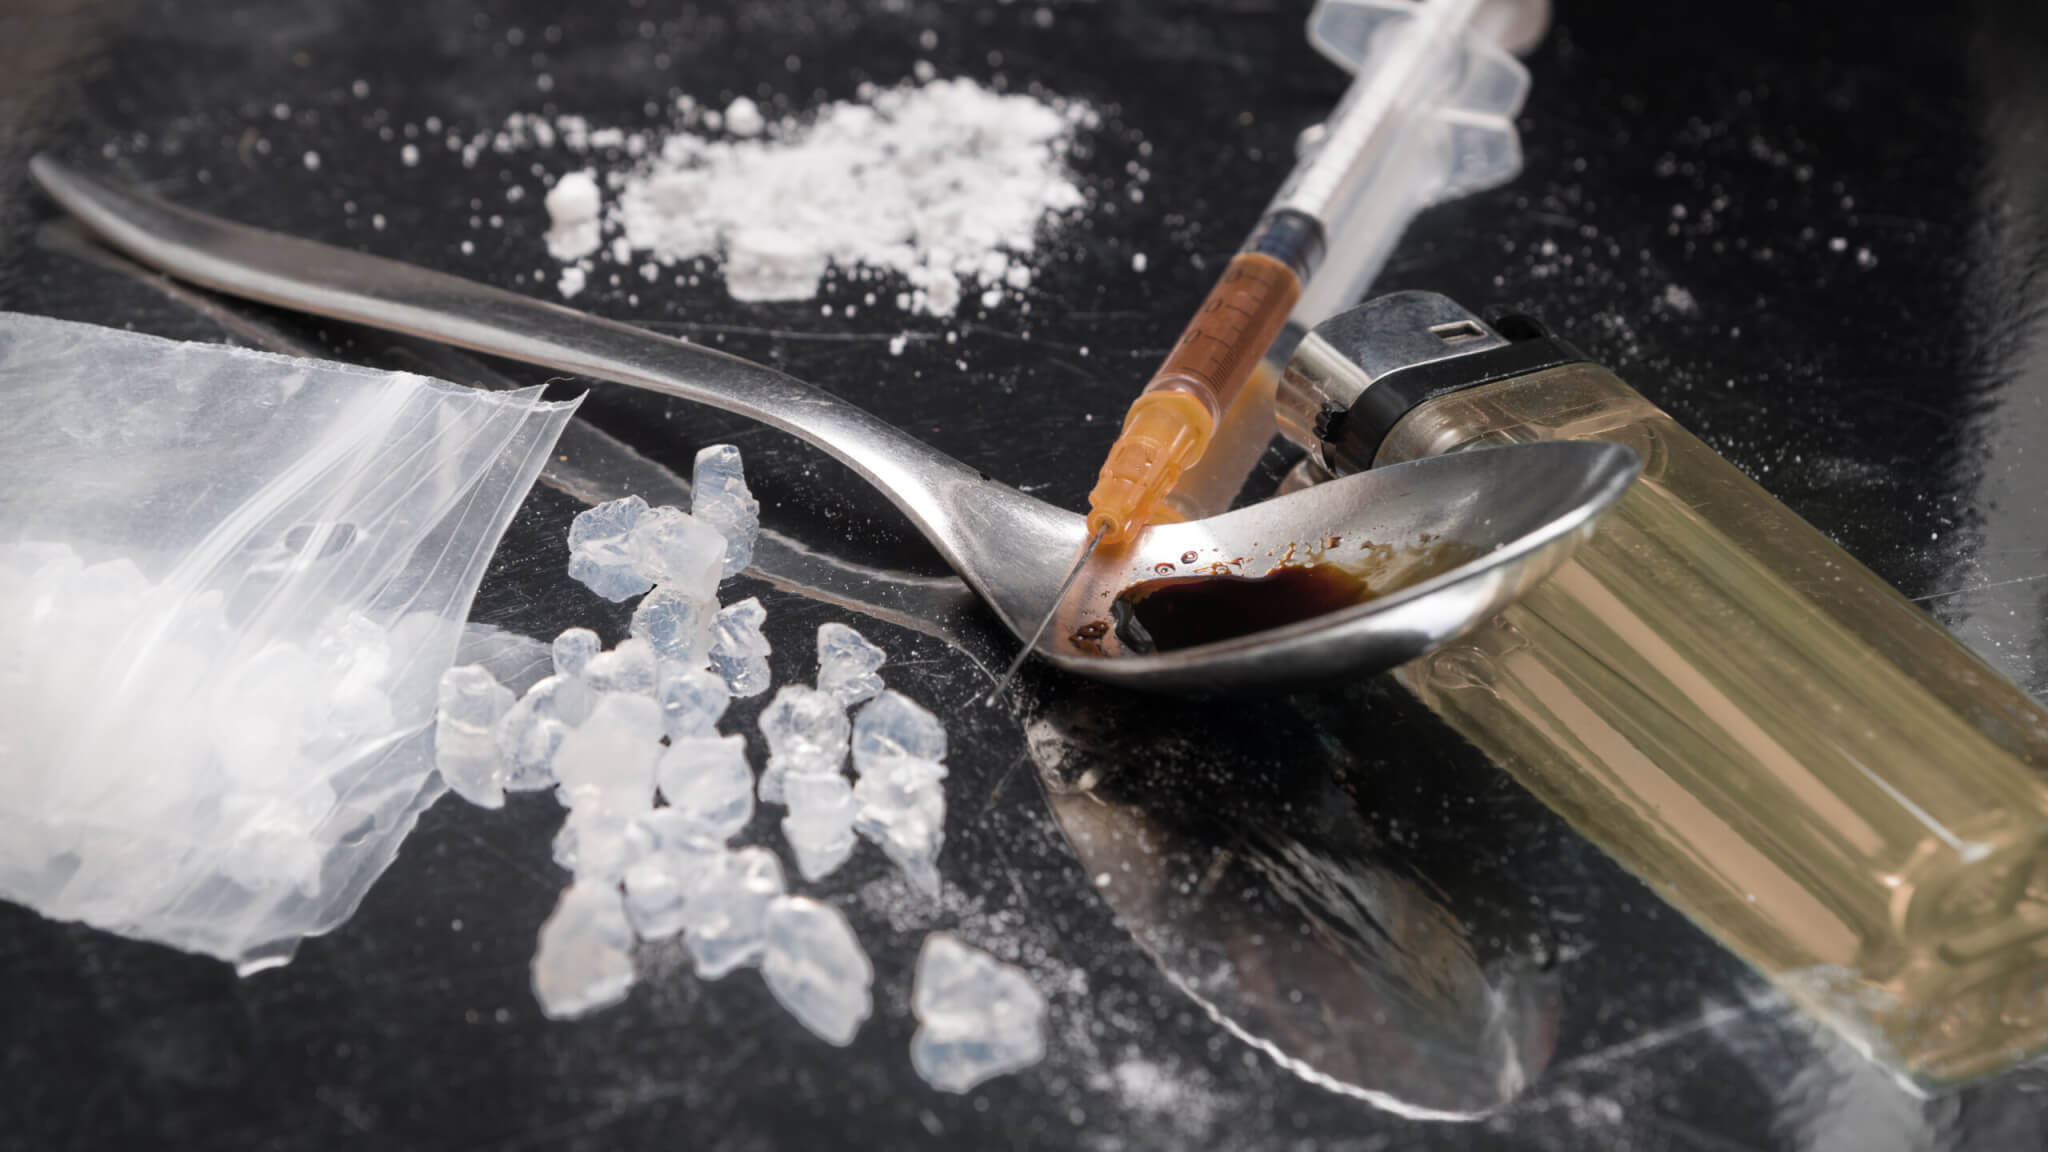 Crystal meth with needle, lighter, spoon